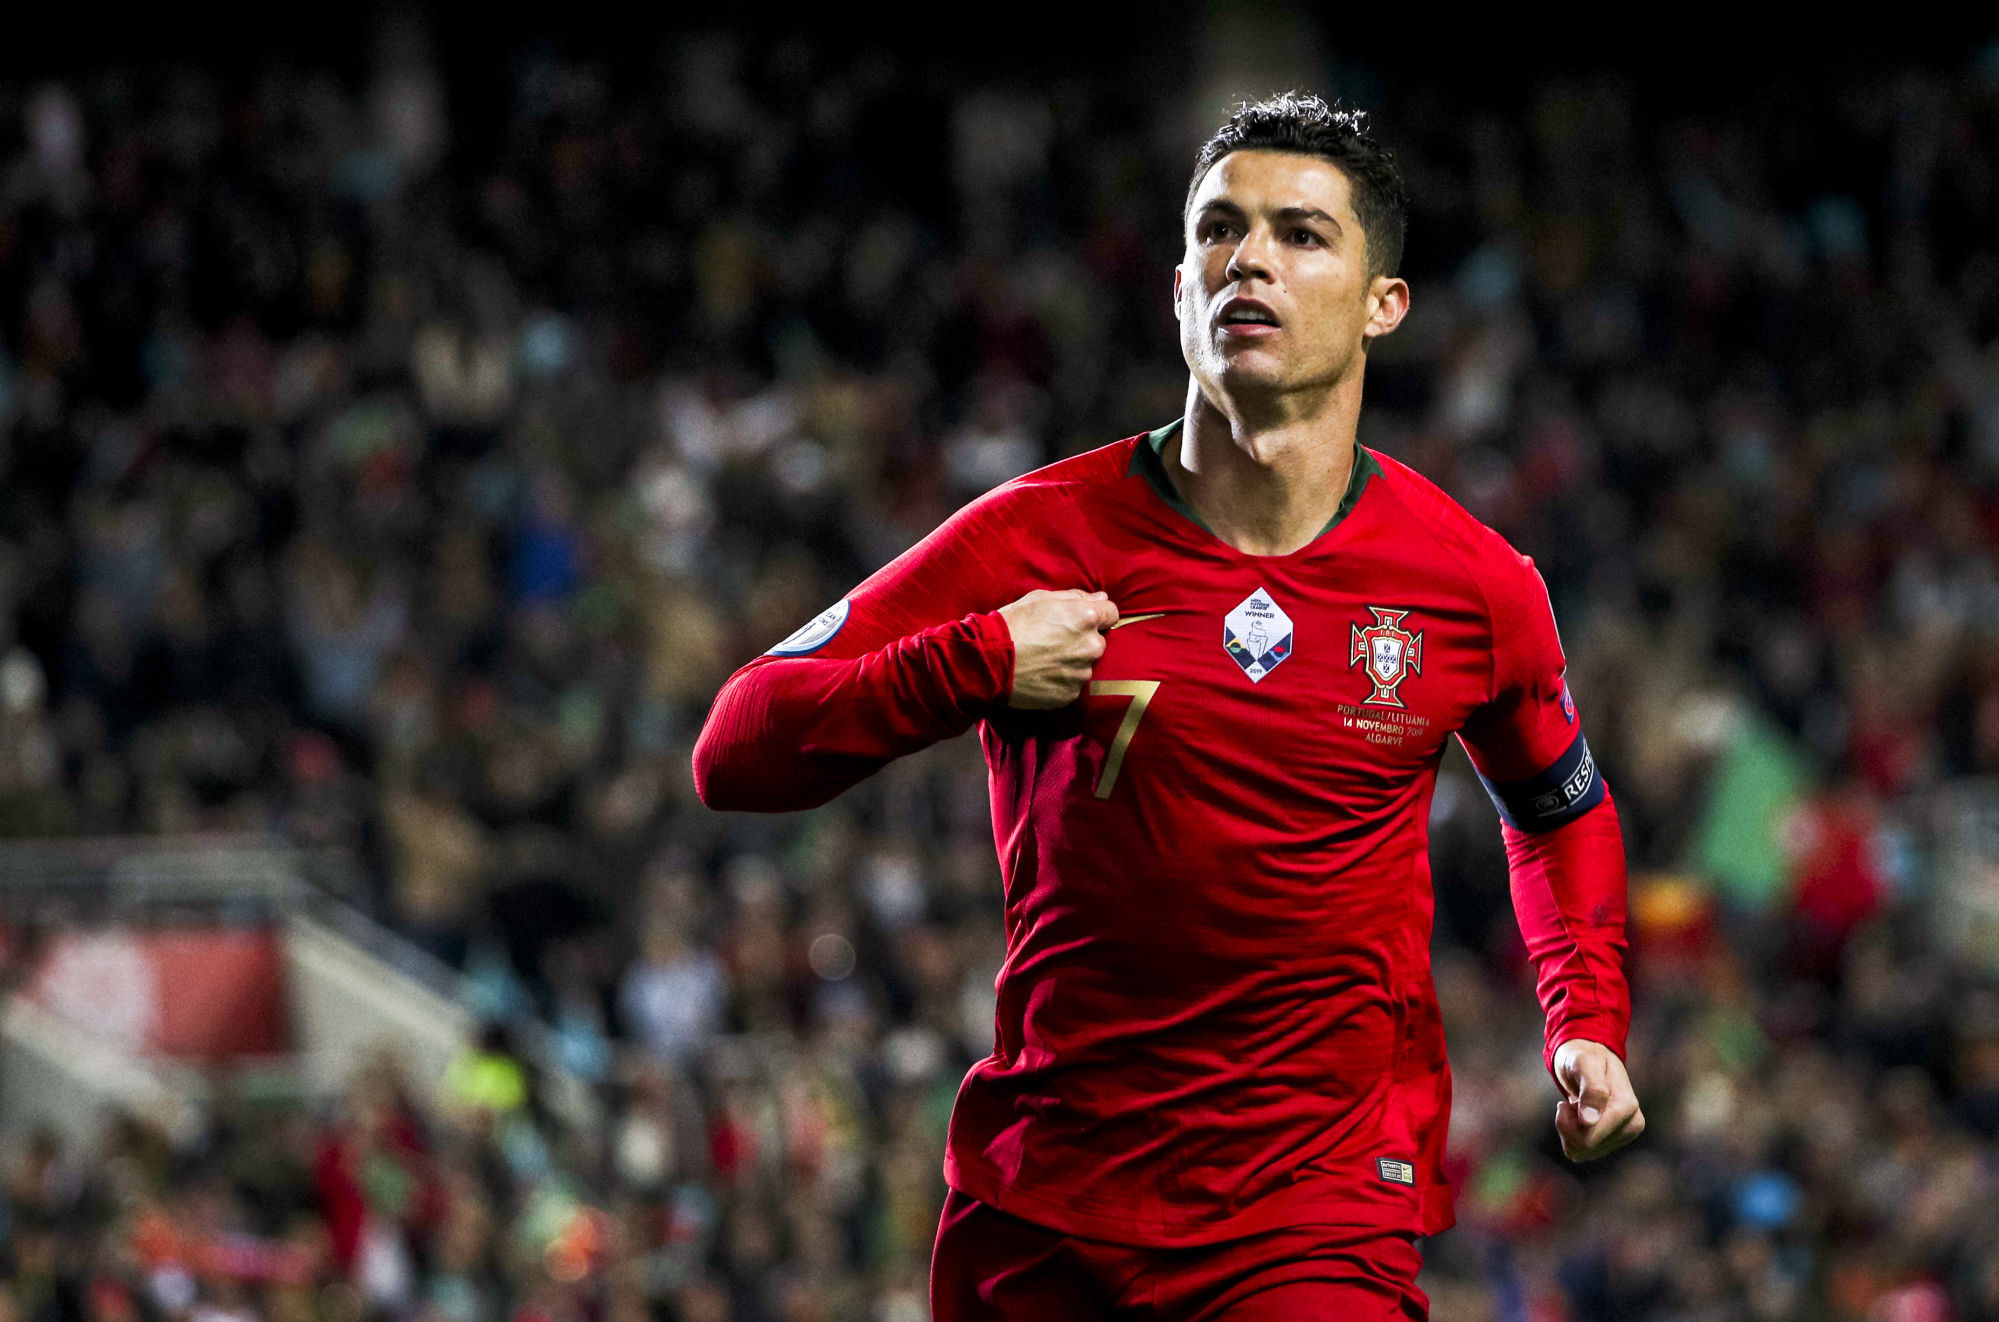 Faro, 14/11/2019 - The Portuguese National Football Team tonight hosted its Lithuanian counterpart at the Algarve Stadium, in a match counting for the 7th round of Group B of the European 2020 Qualifying Round. Cristiano Ronaldo (2-0) (Filipe Amorim / Global Images) 

Photo by Icon Sport - Cristiano RONALDO - Almancil (Portugal)